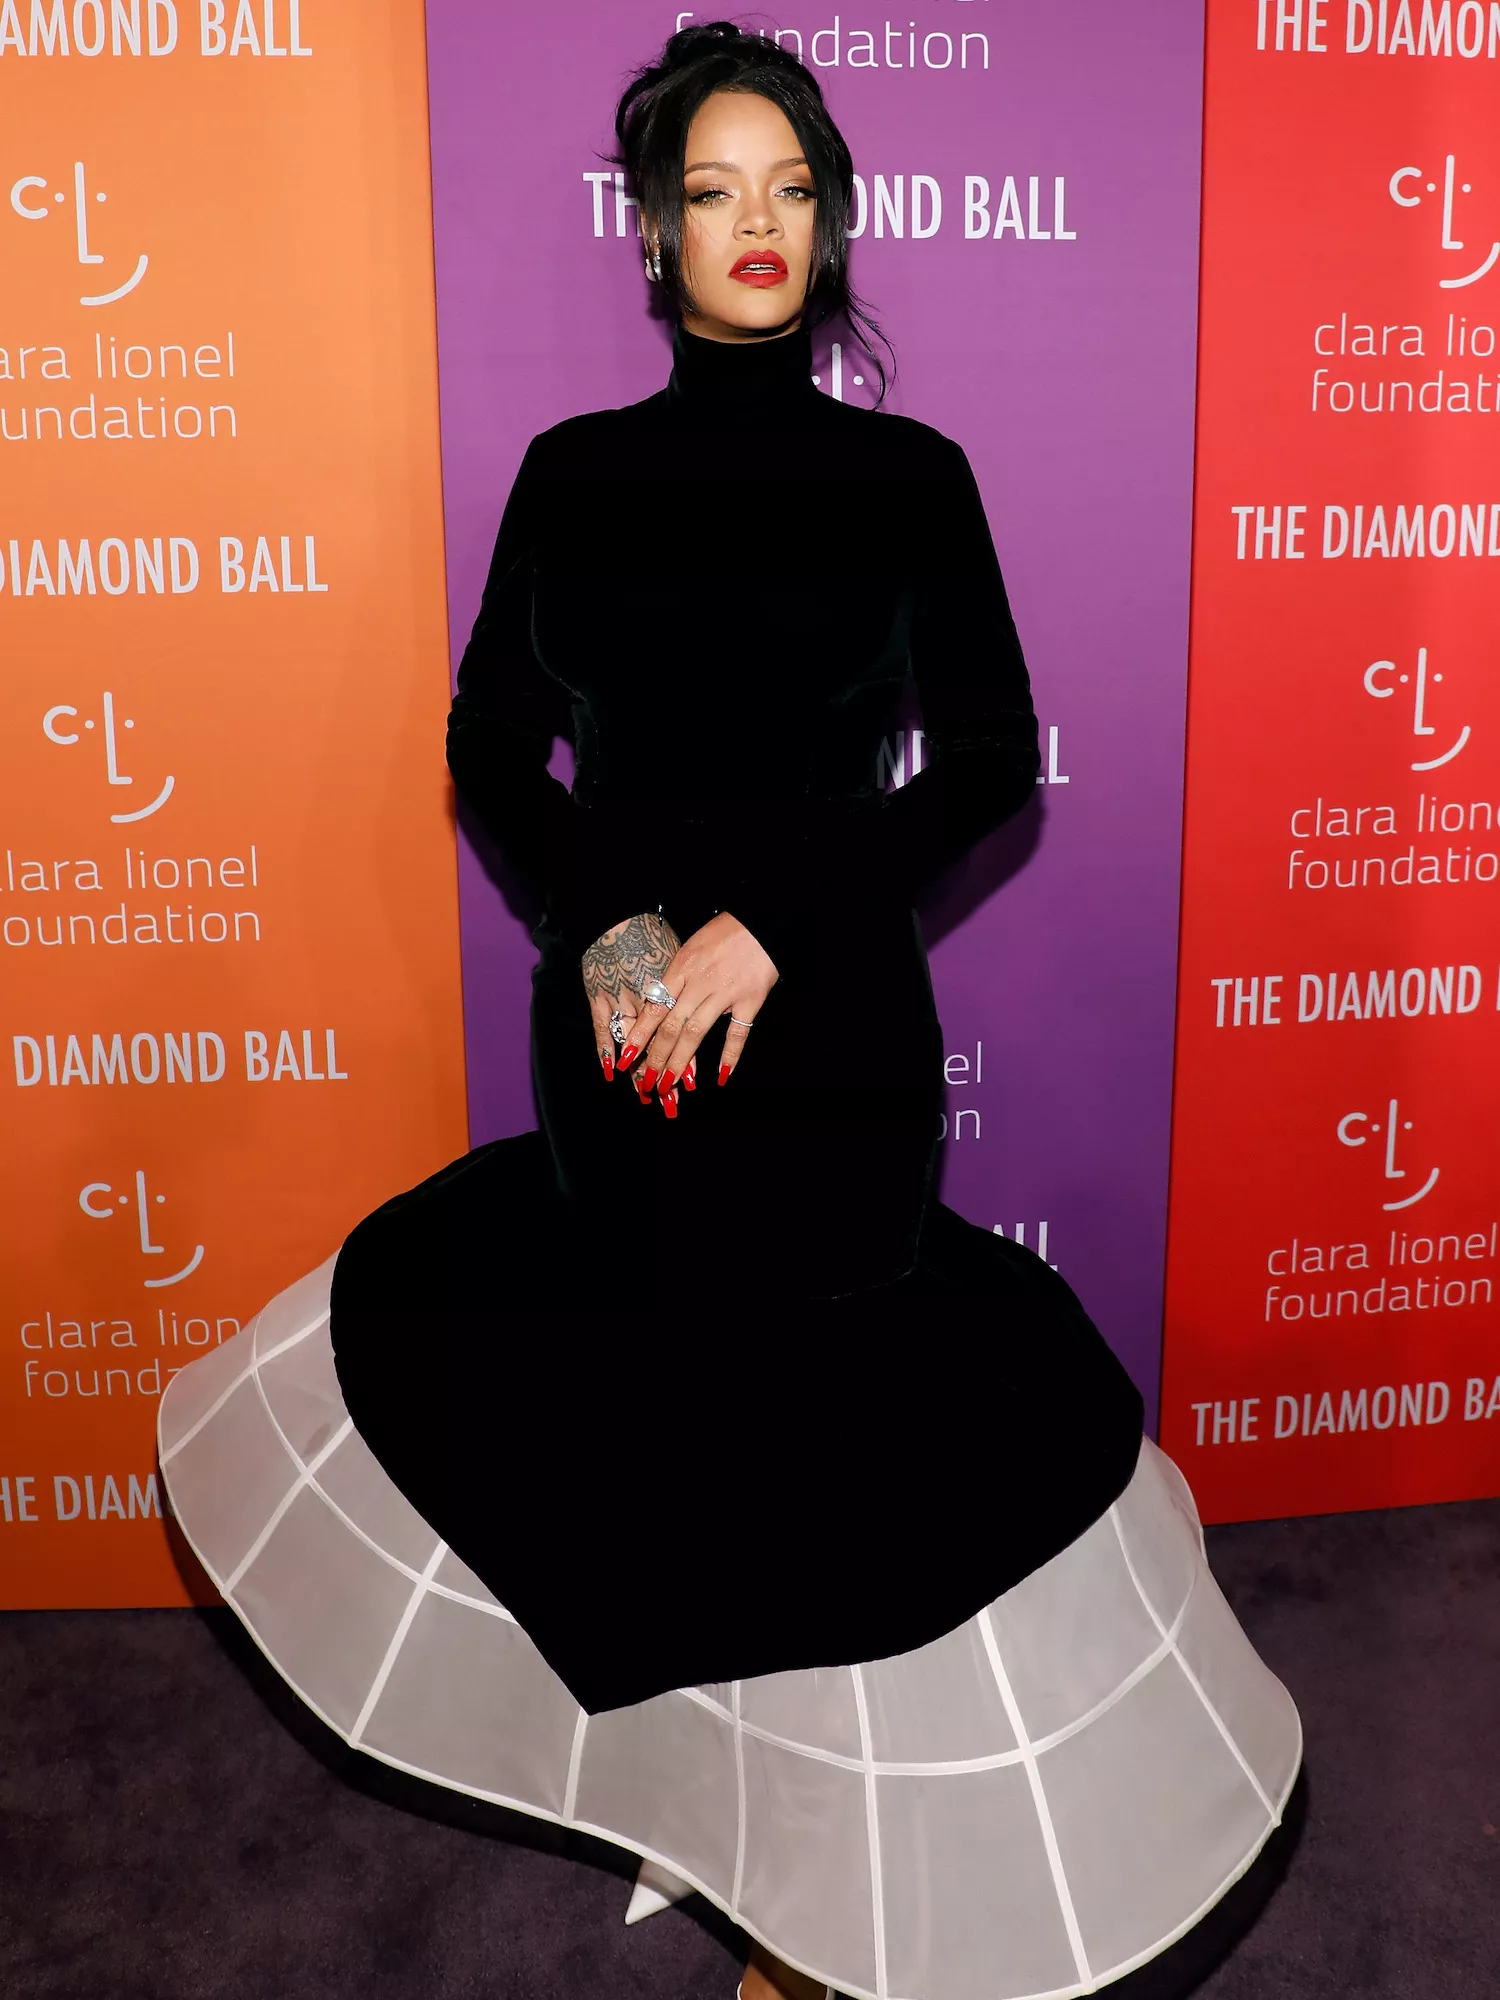 Rihanna wears a black Givenchy couture dress with drop waist and white hoop skirt to the 2019 Diamond Ball